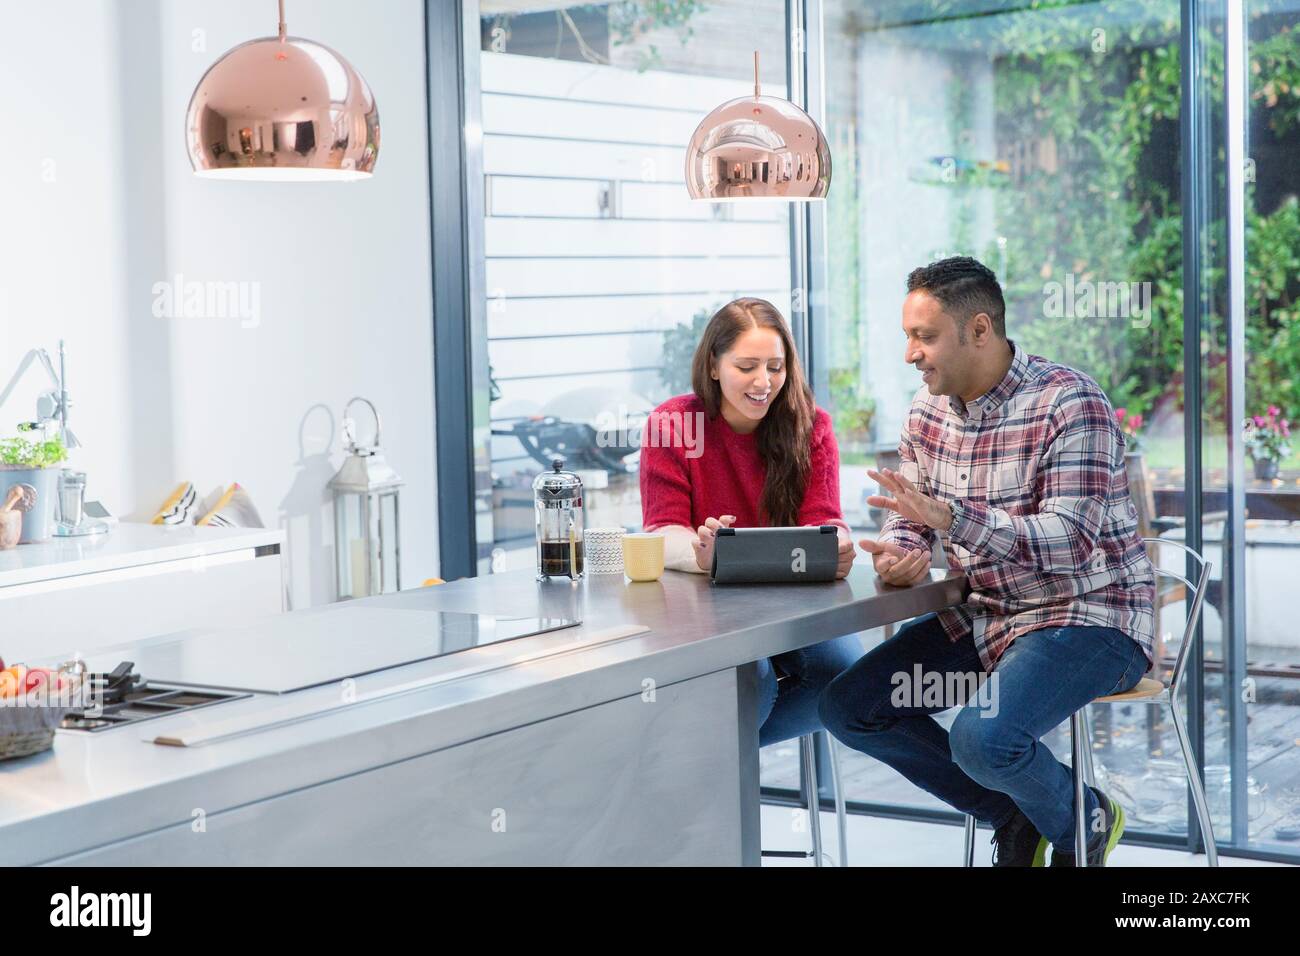 Couple using digital tablet at kitchen island Stock Photo